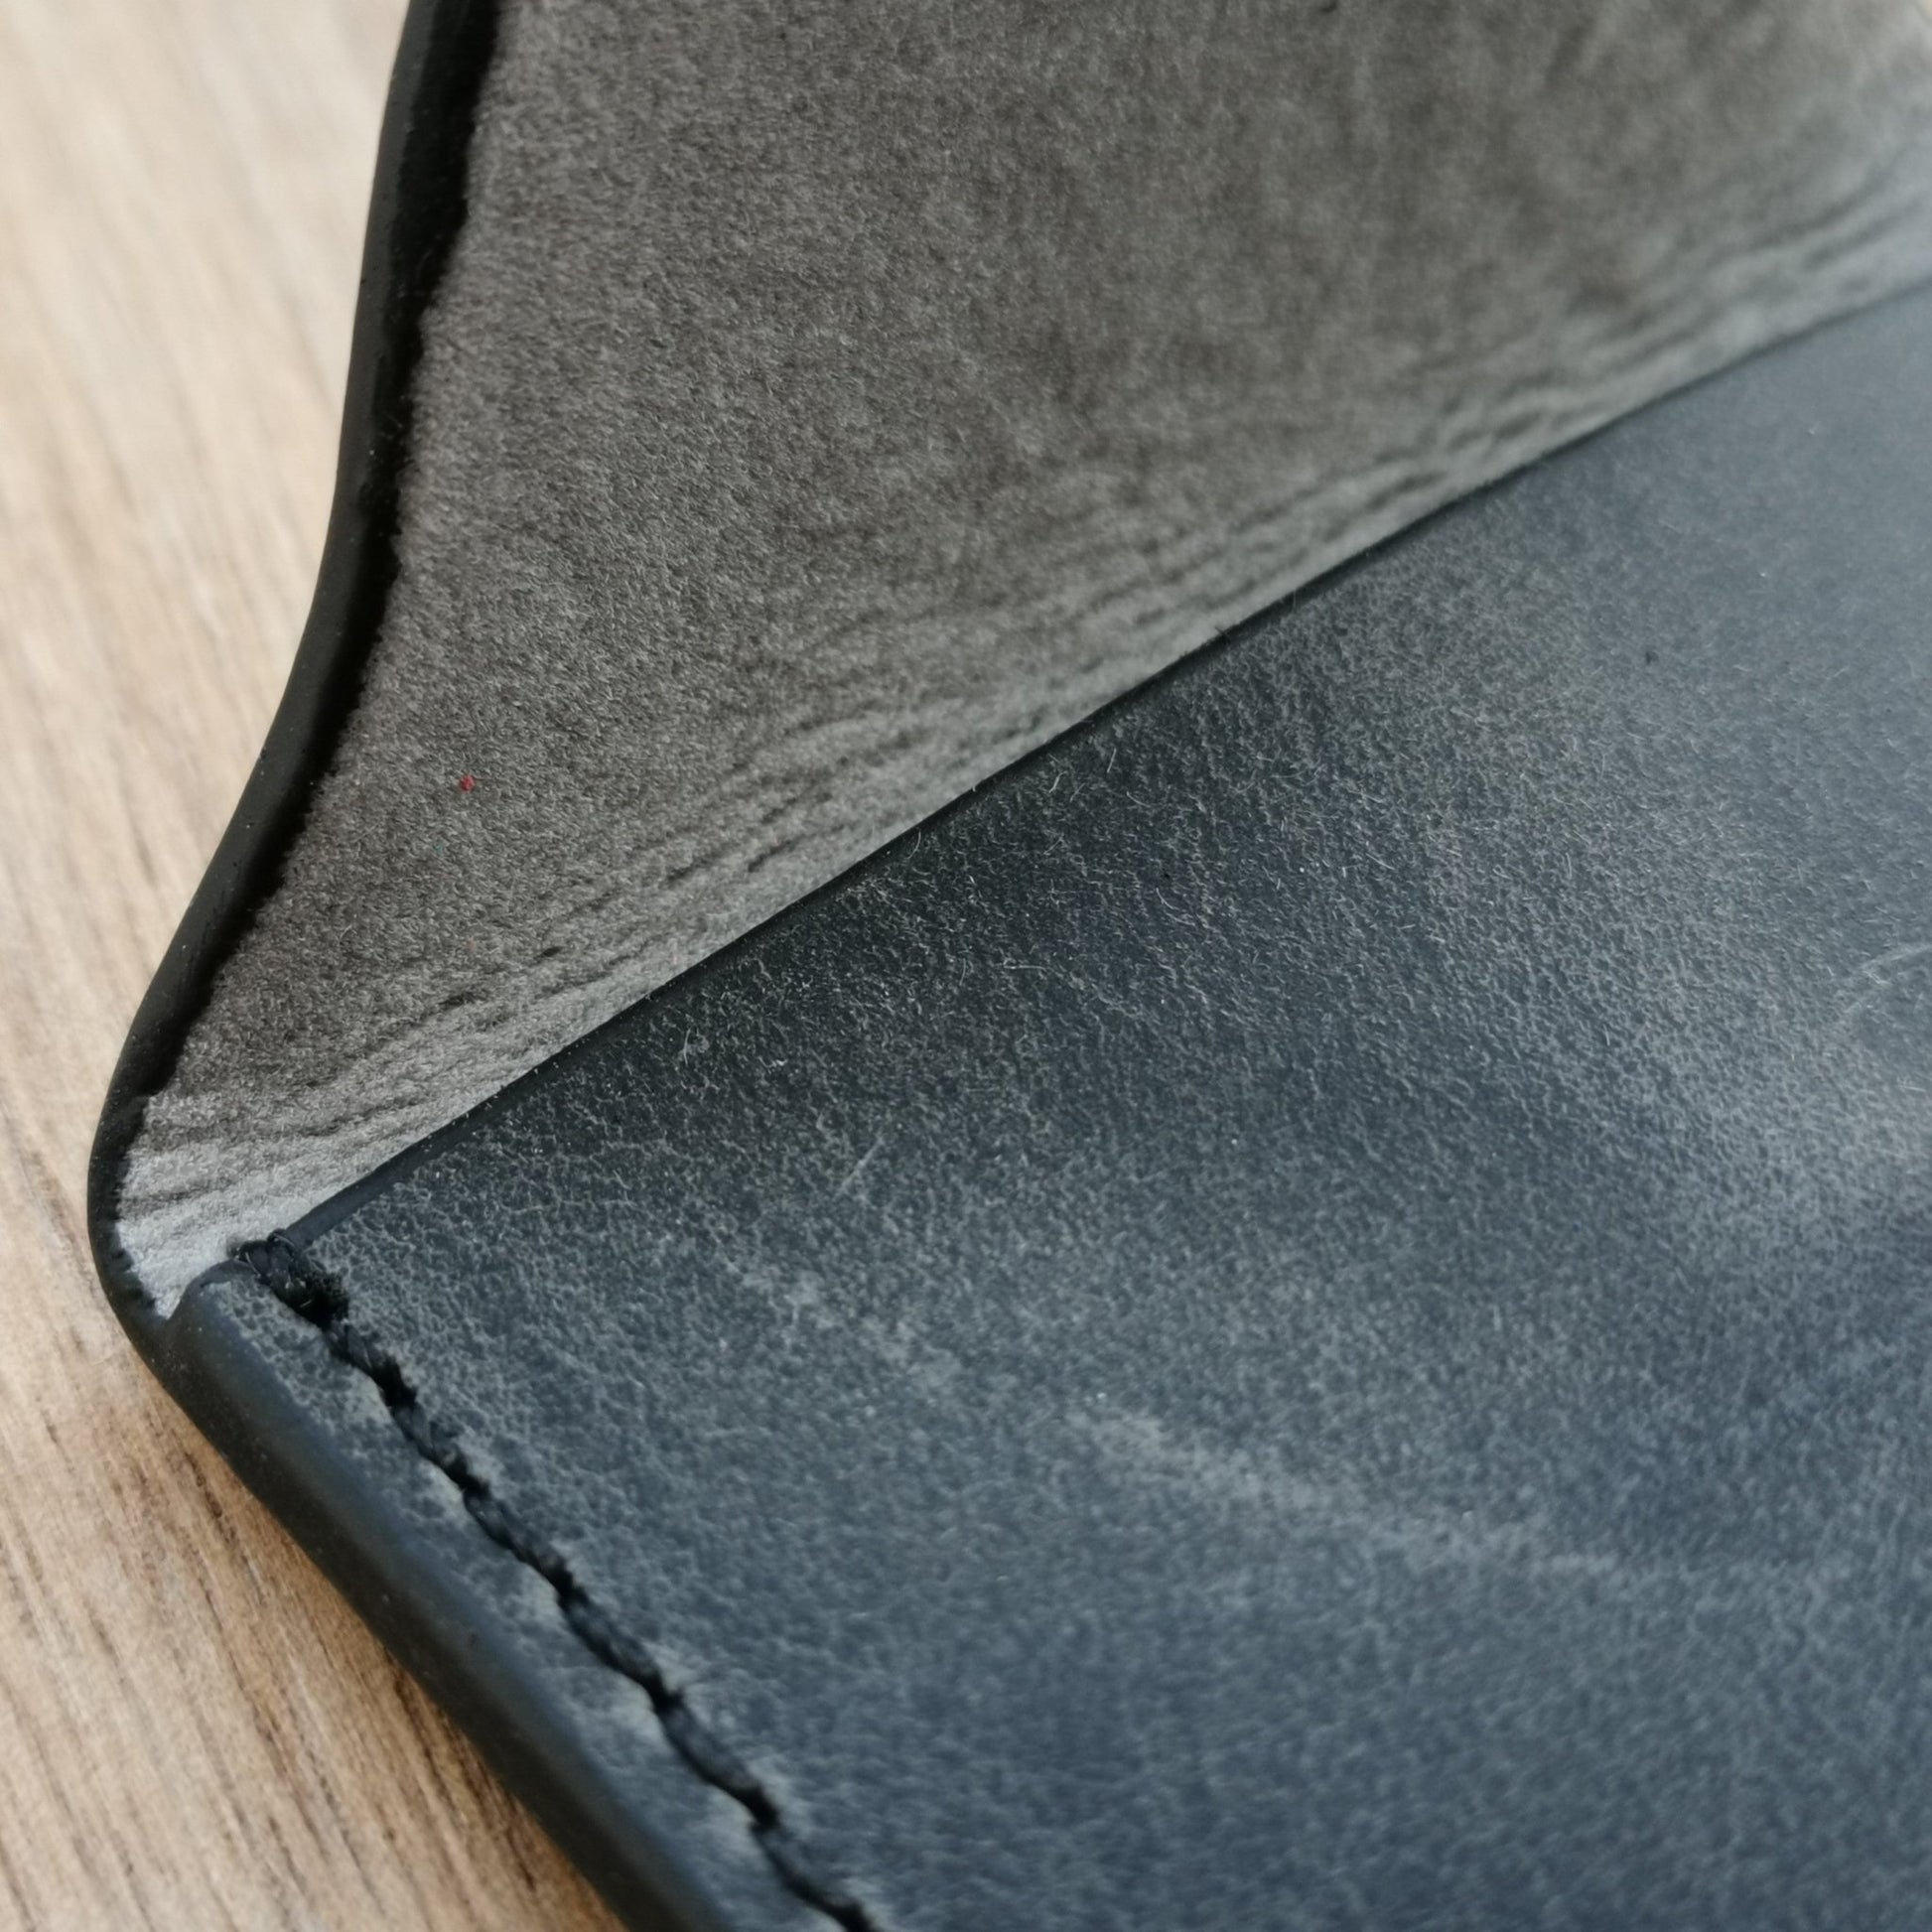 Soft light grey microfibre lining on the dallas grey full grain leather watch case.